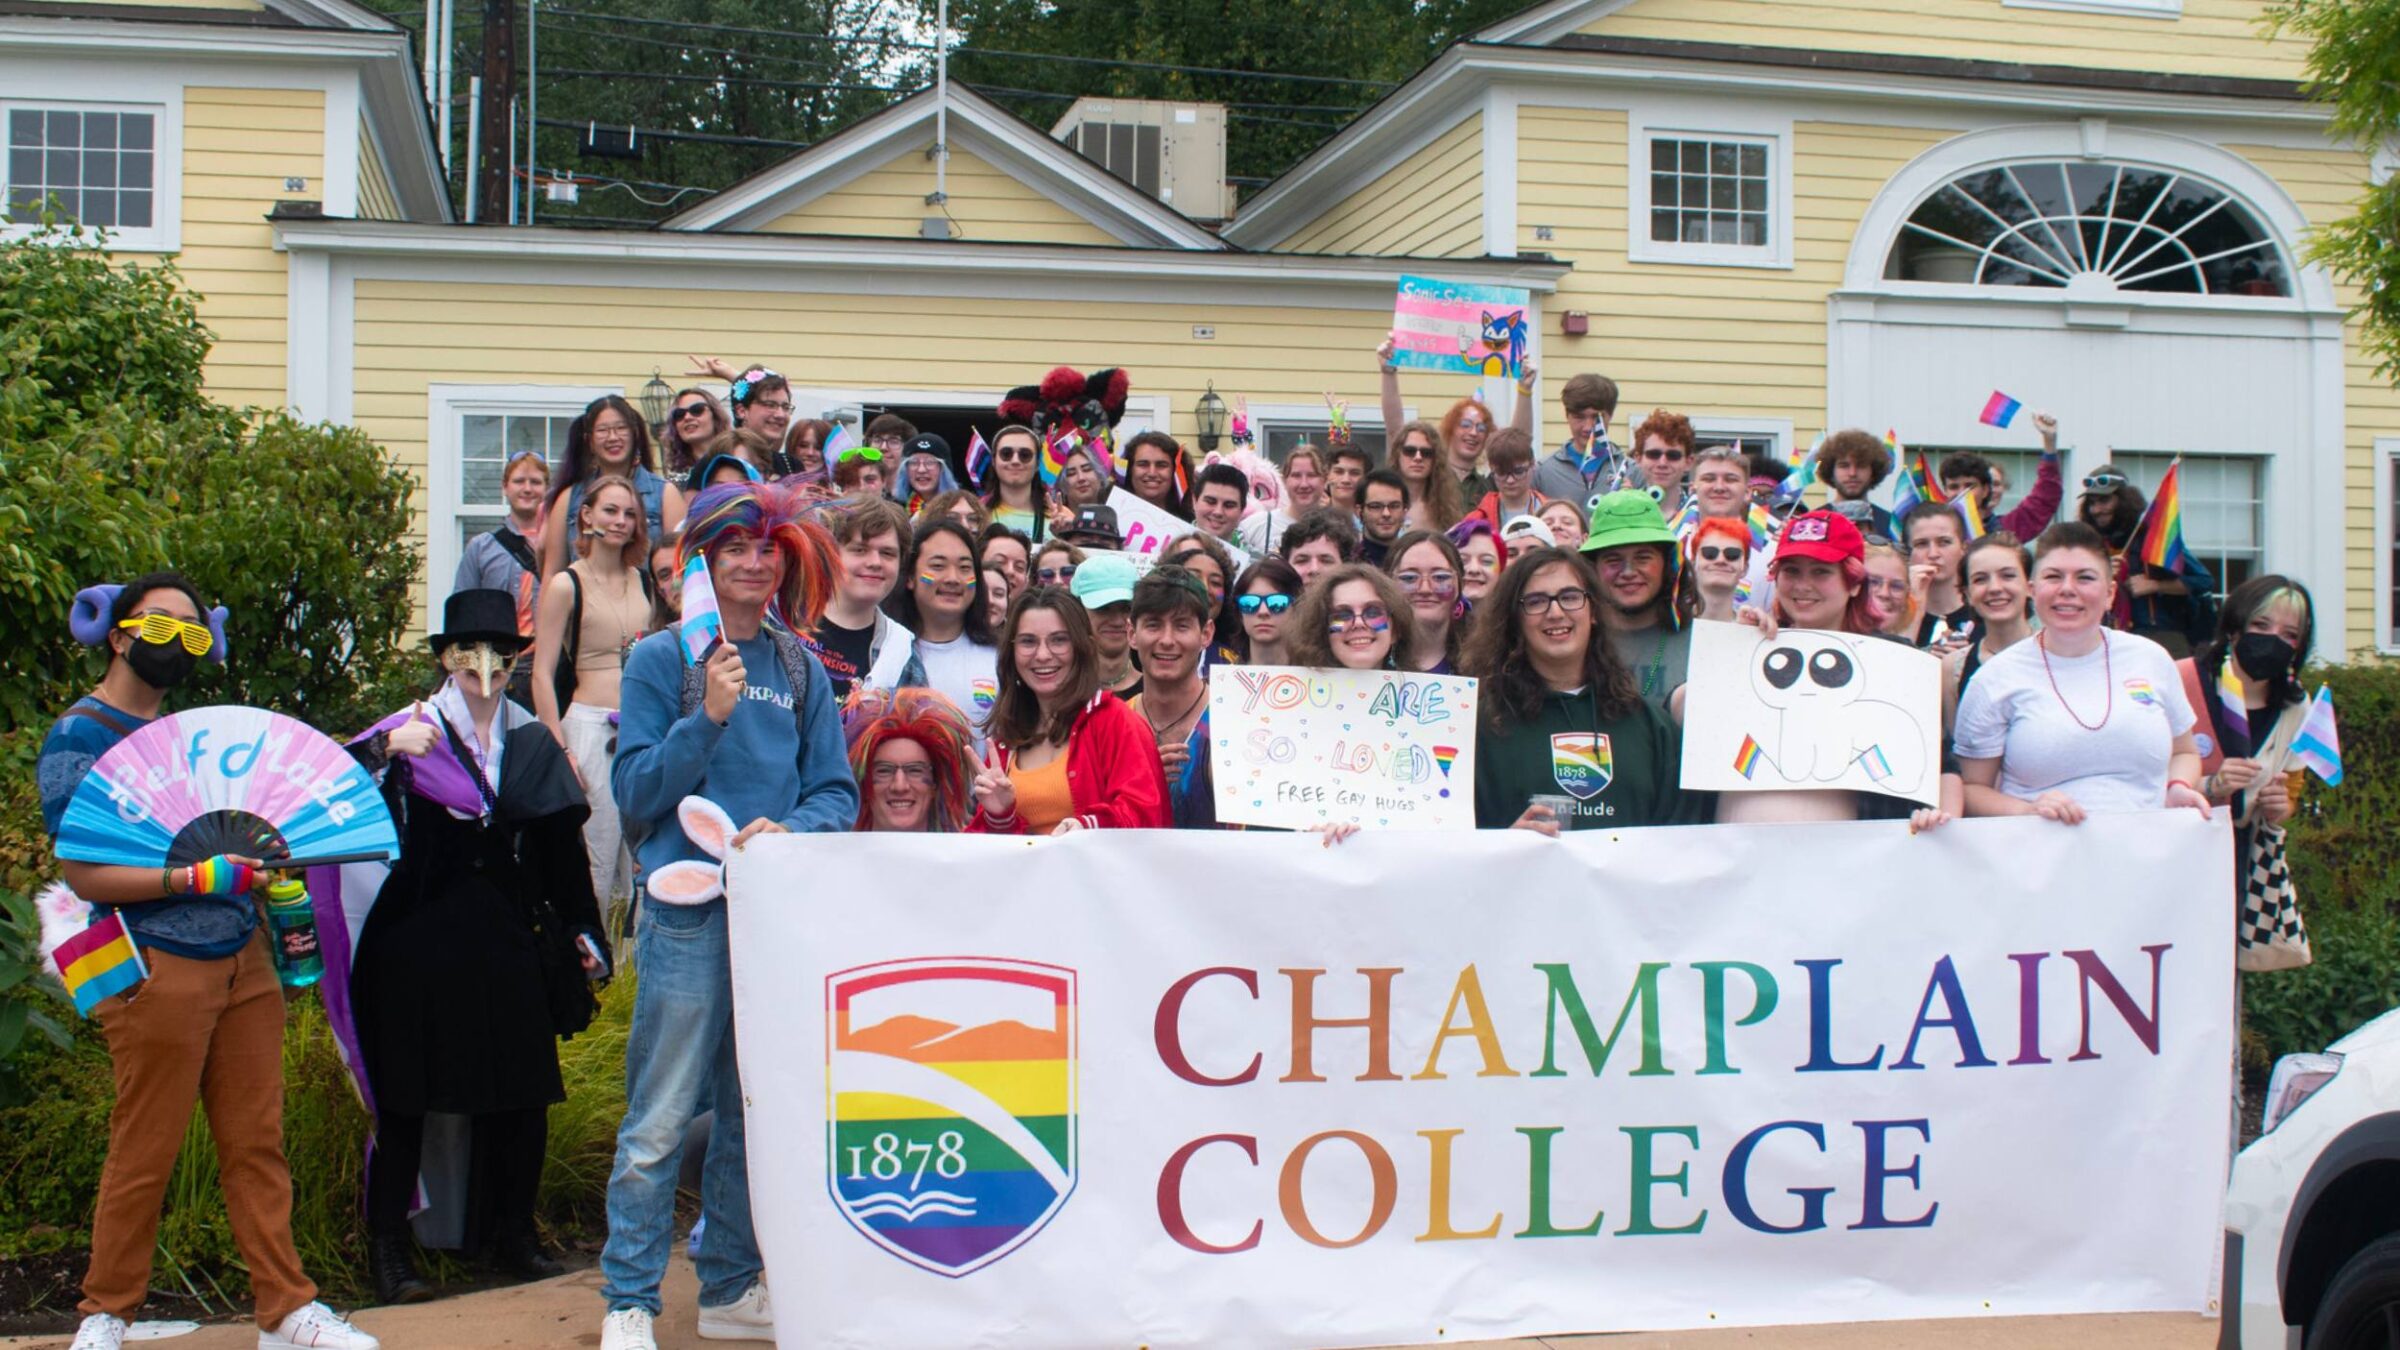 WGC Pride Parade student group photo with a Champlain College banner